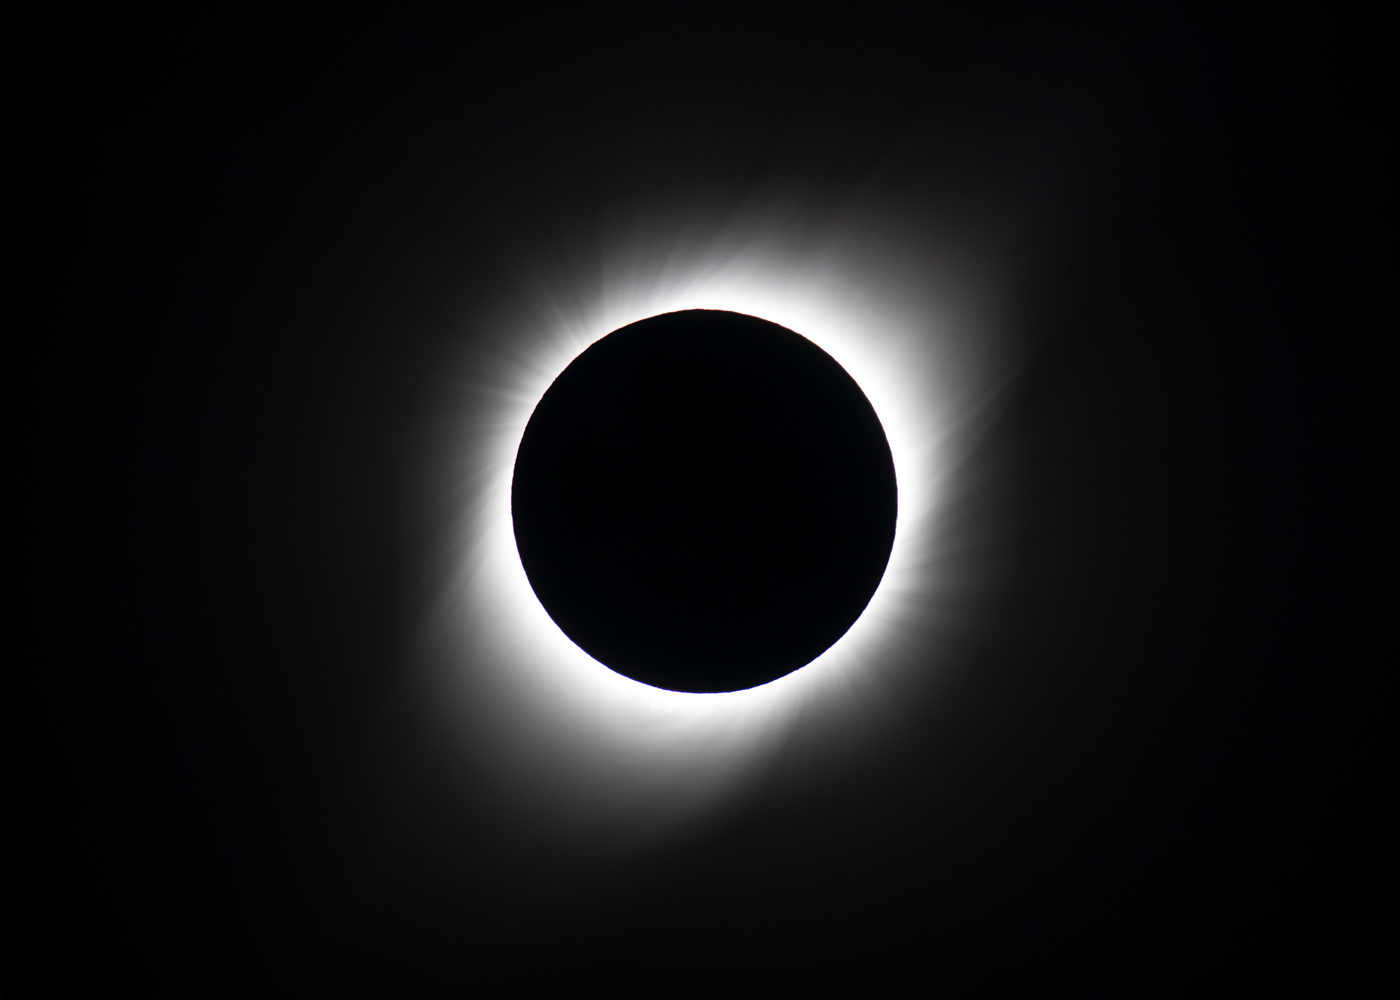 A closeup of the eclipse. These are actual colors, not a BW rendering. If you look closely, you'll be able to see the red fringe surrounding the sun. I especially liked the coronal rays and the beautiful symmetry. The fact that the protrusions in the corona were diagonal didn't hurt one bit. Canon 80D, Sigma 150-600mm at 600mm, f/8, 1/40 sec, ISO 200